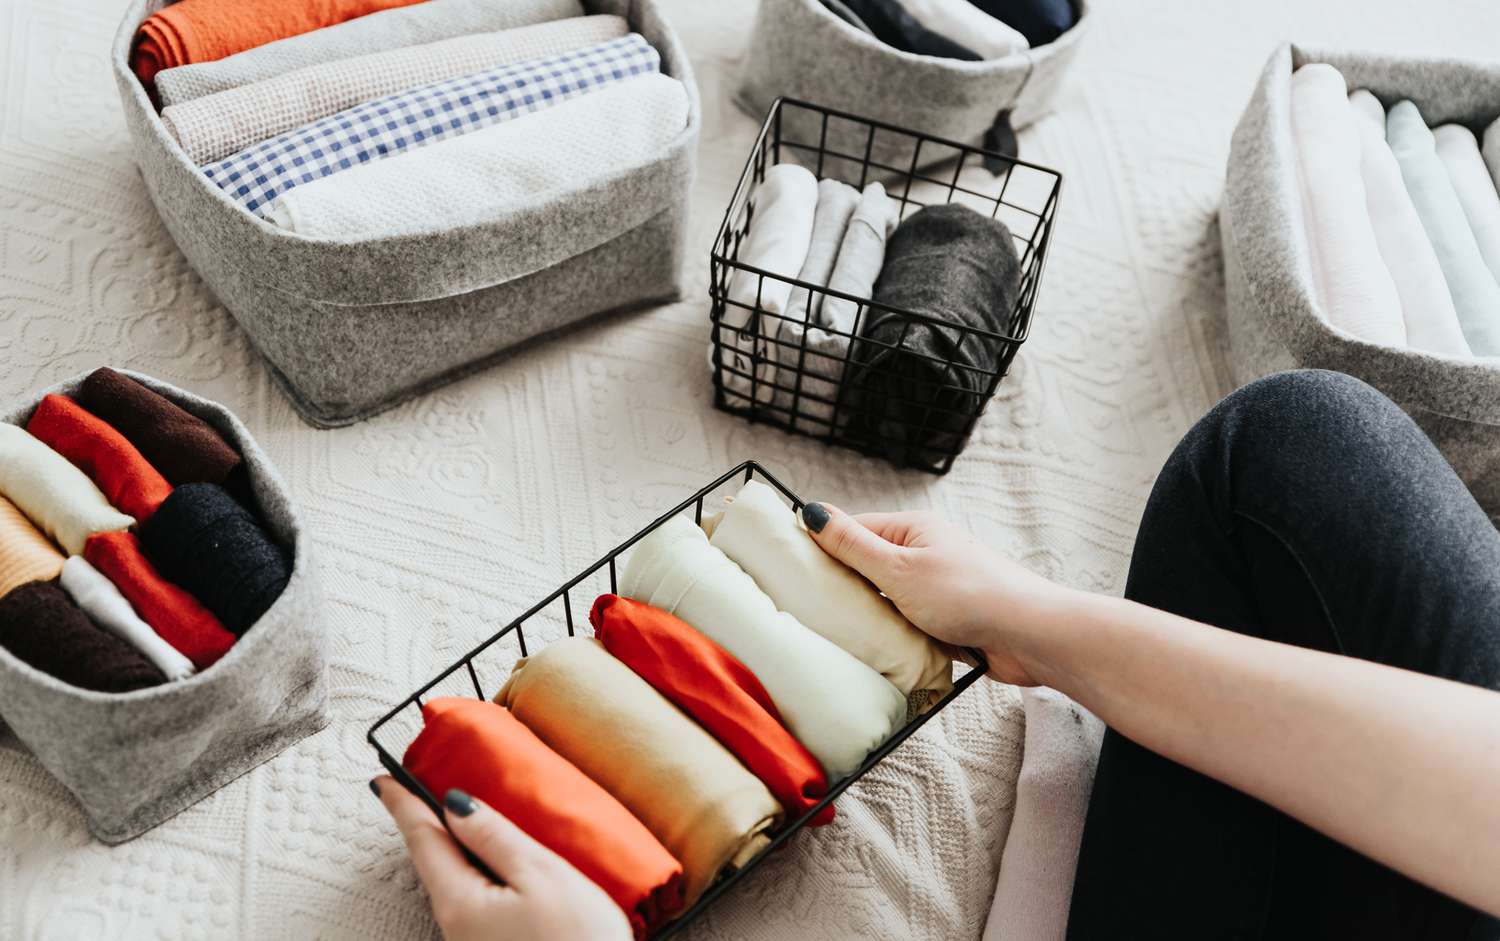 Woman organizing her clothes into baskets